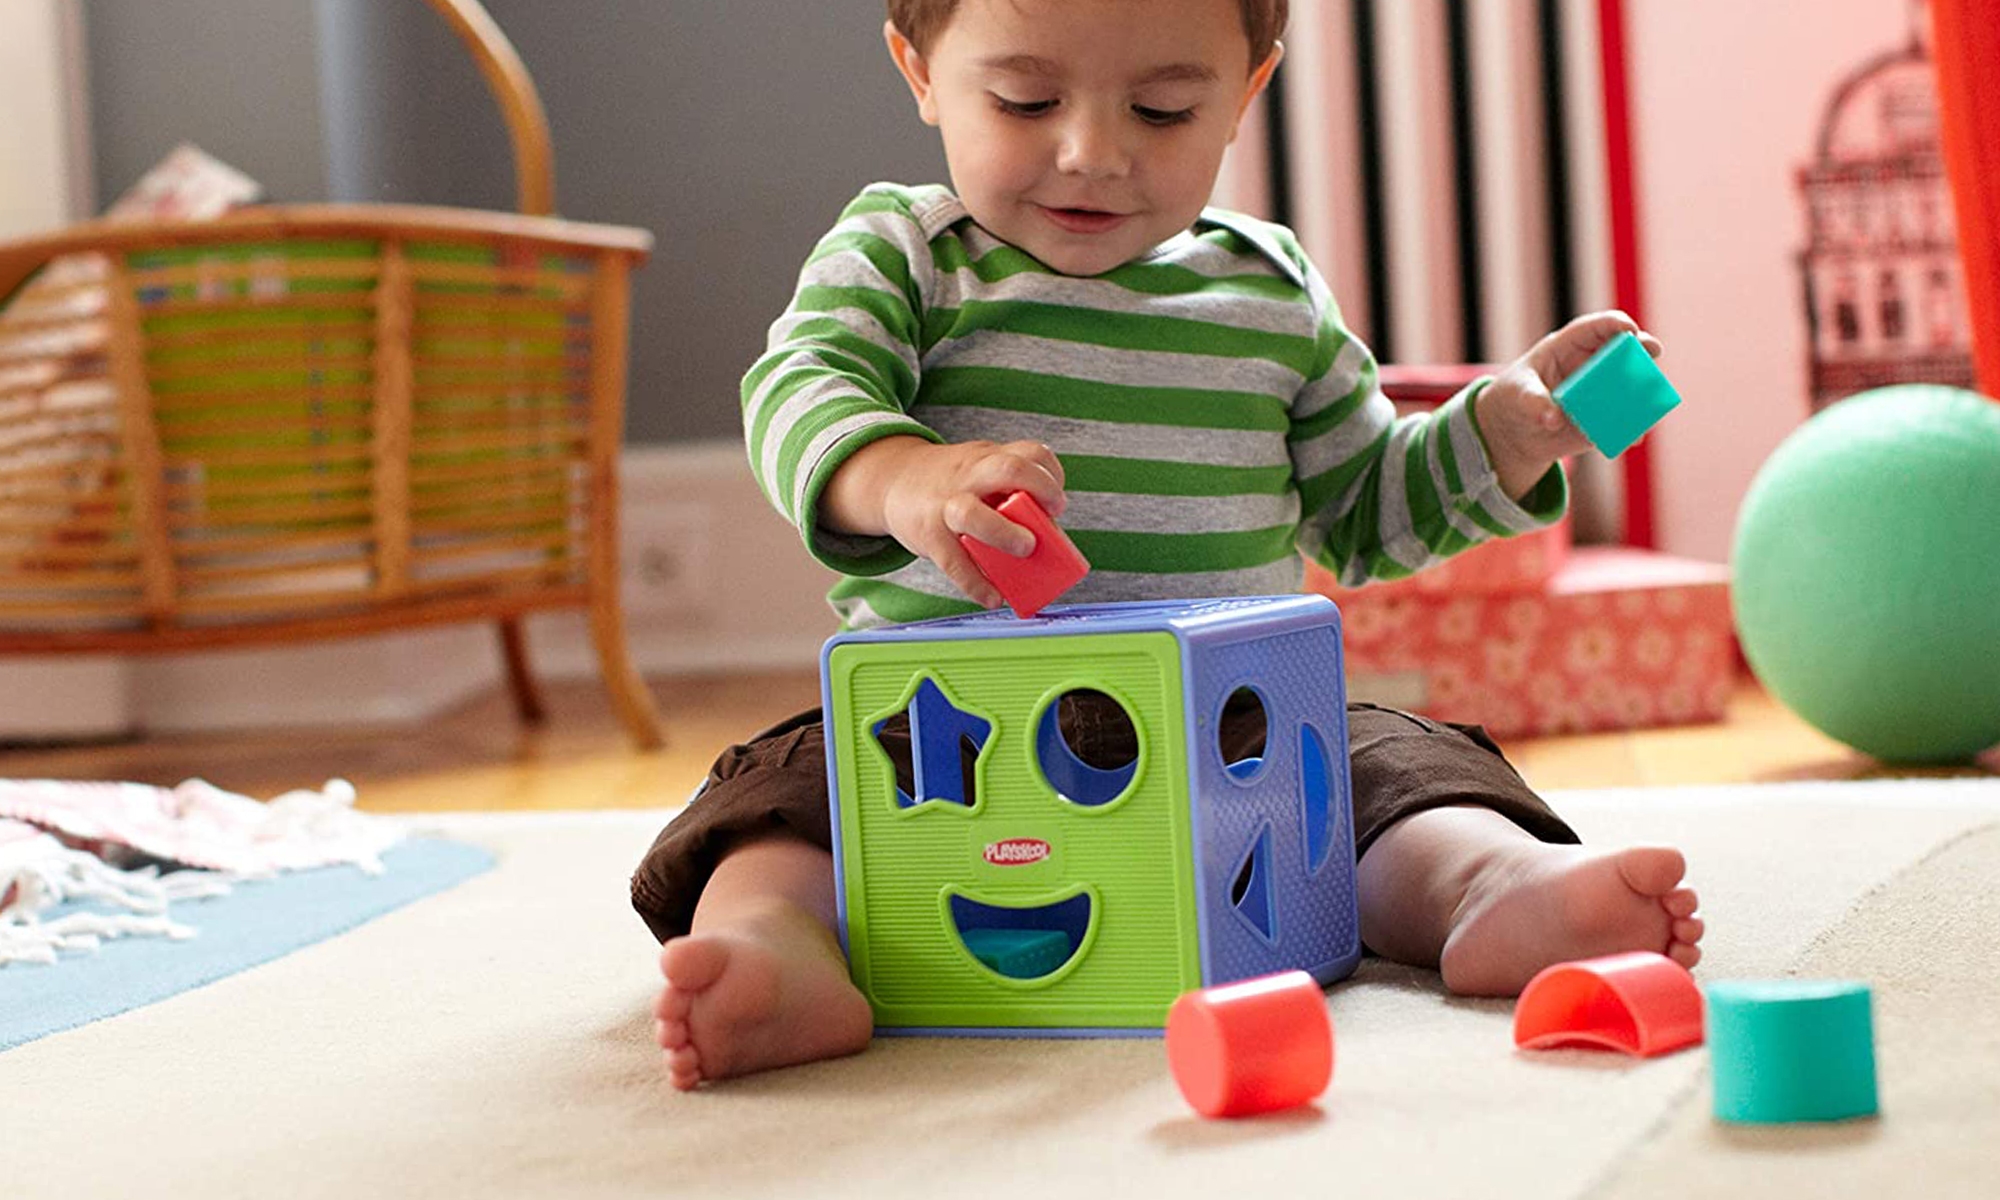 The best educational toys for kids | DeviceDaily.com